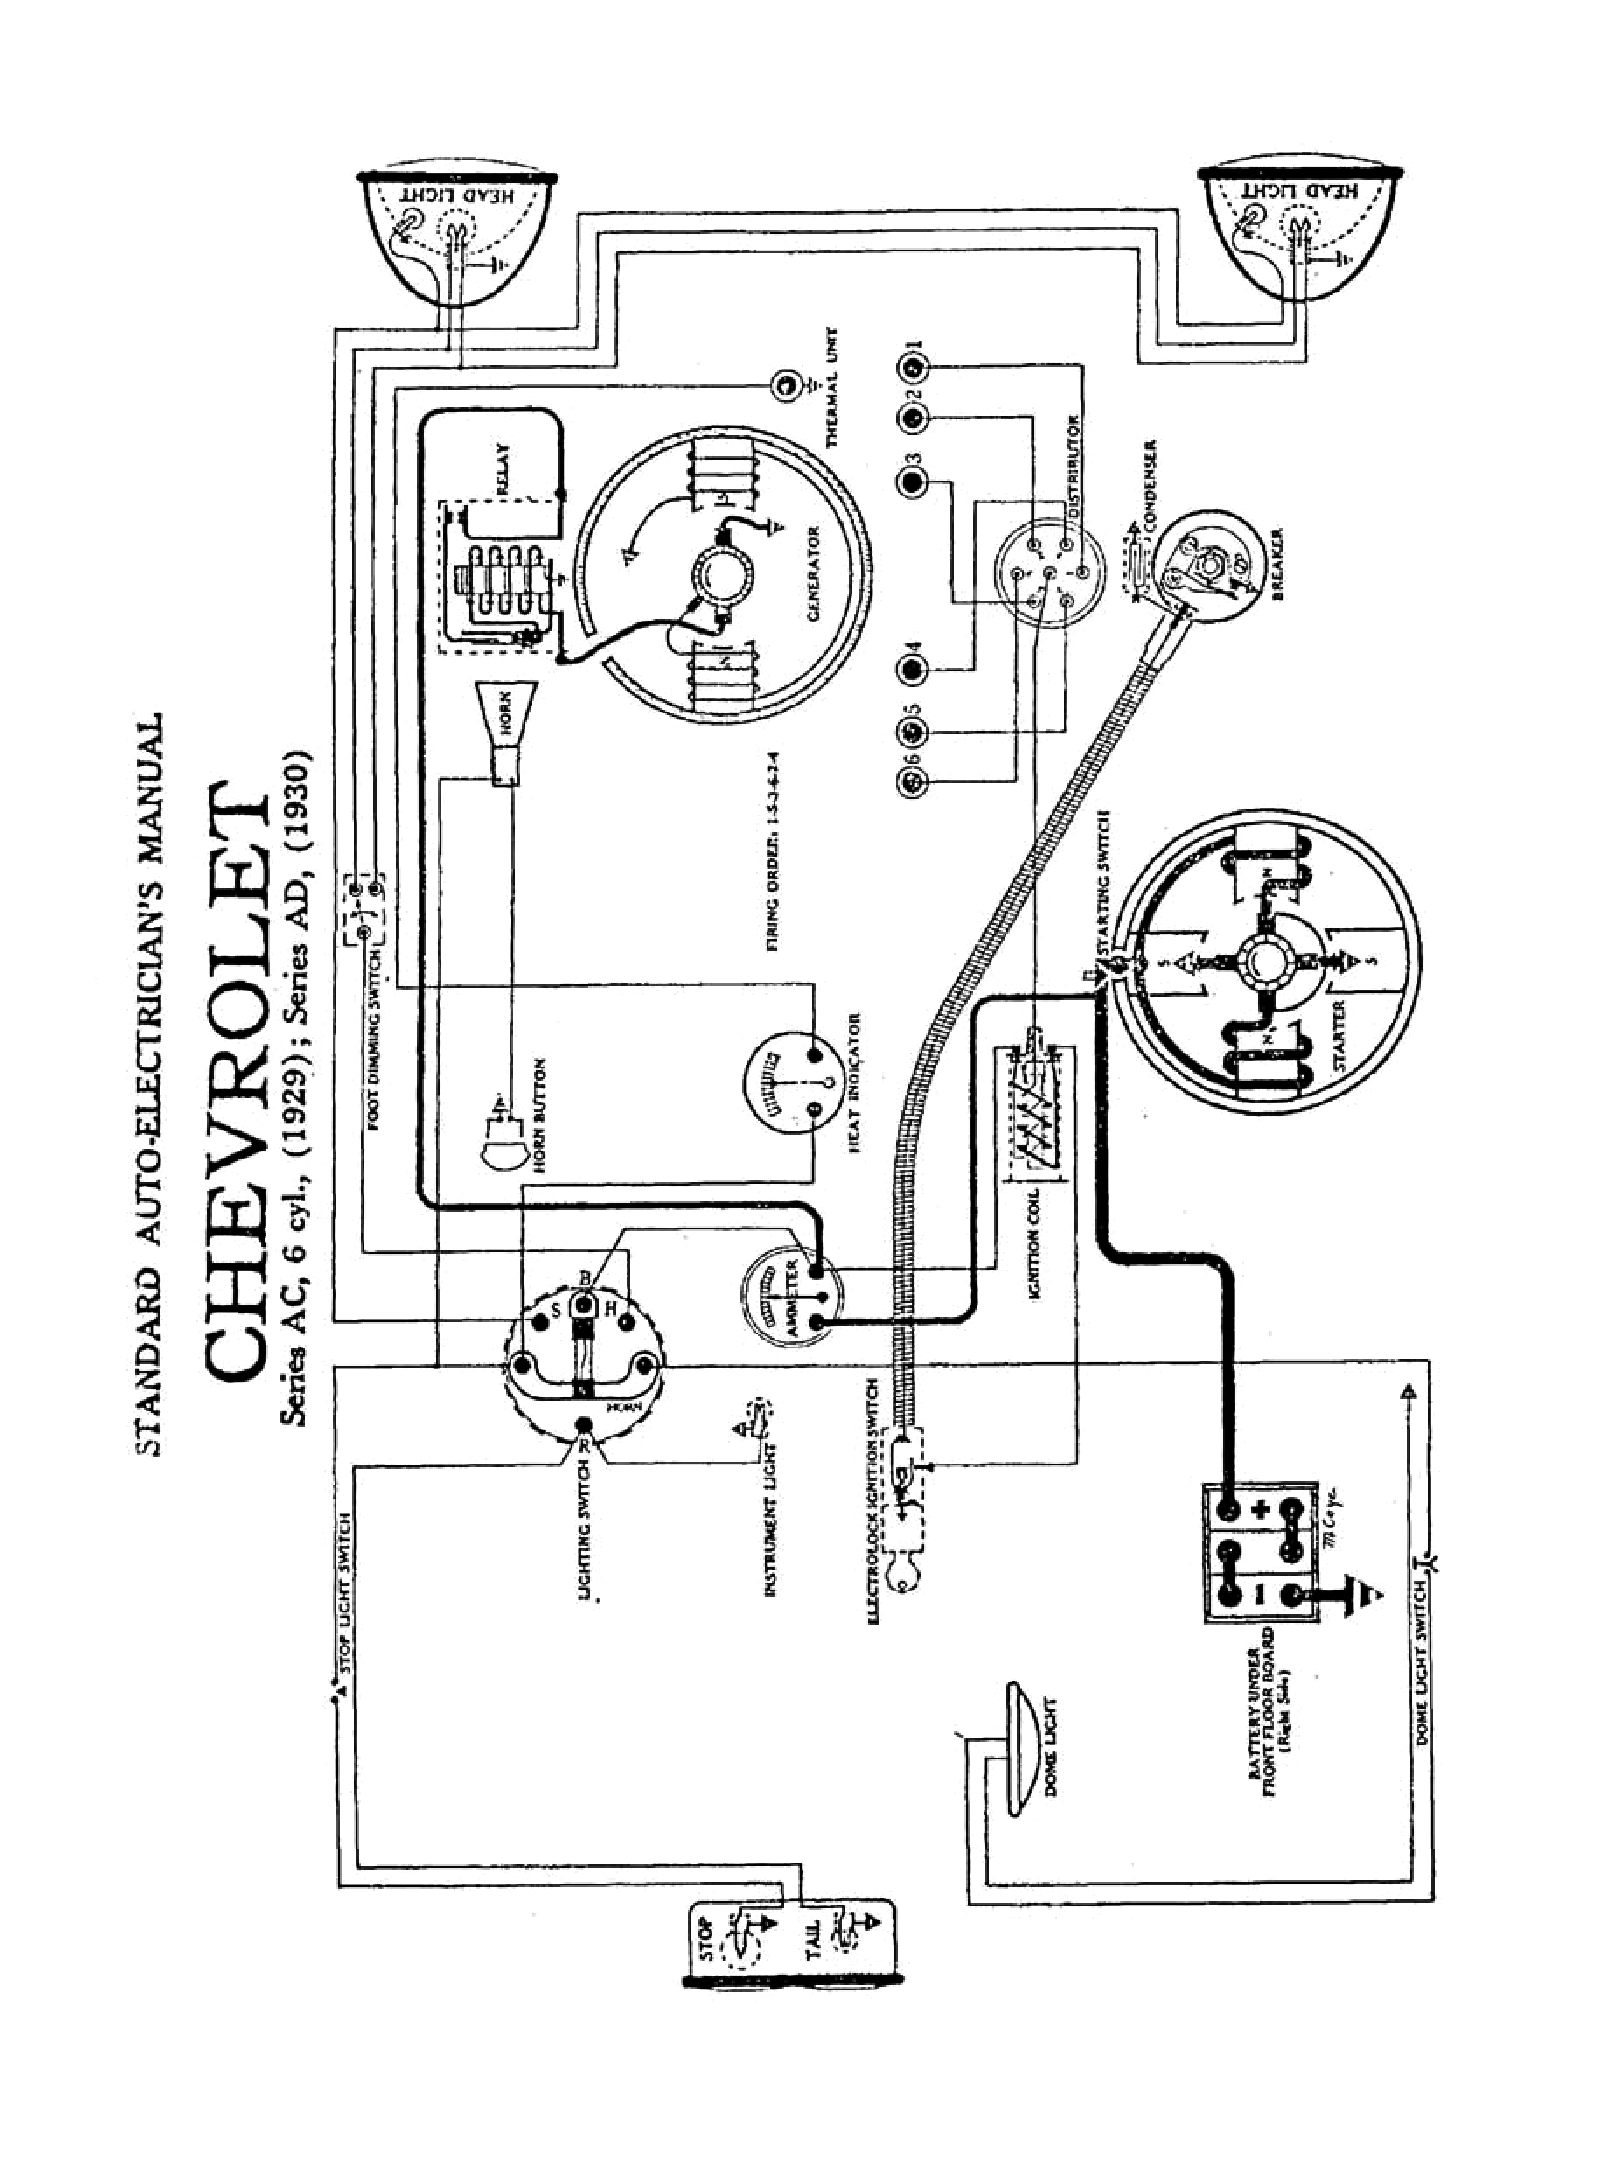 Wiring Diagram Ford Trocter In 1942 - Wiring Diagram Data - Ford Tractor Ignition Switch Wiring Diagram